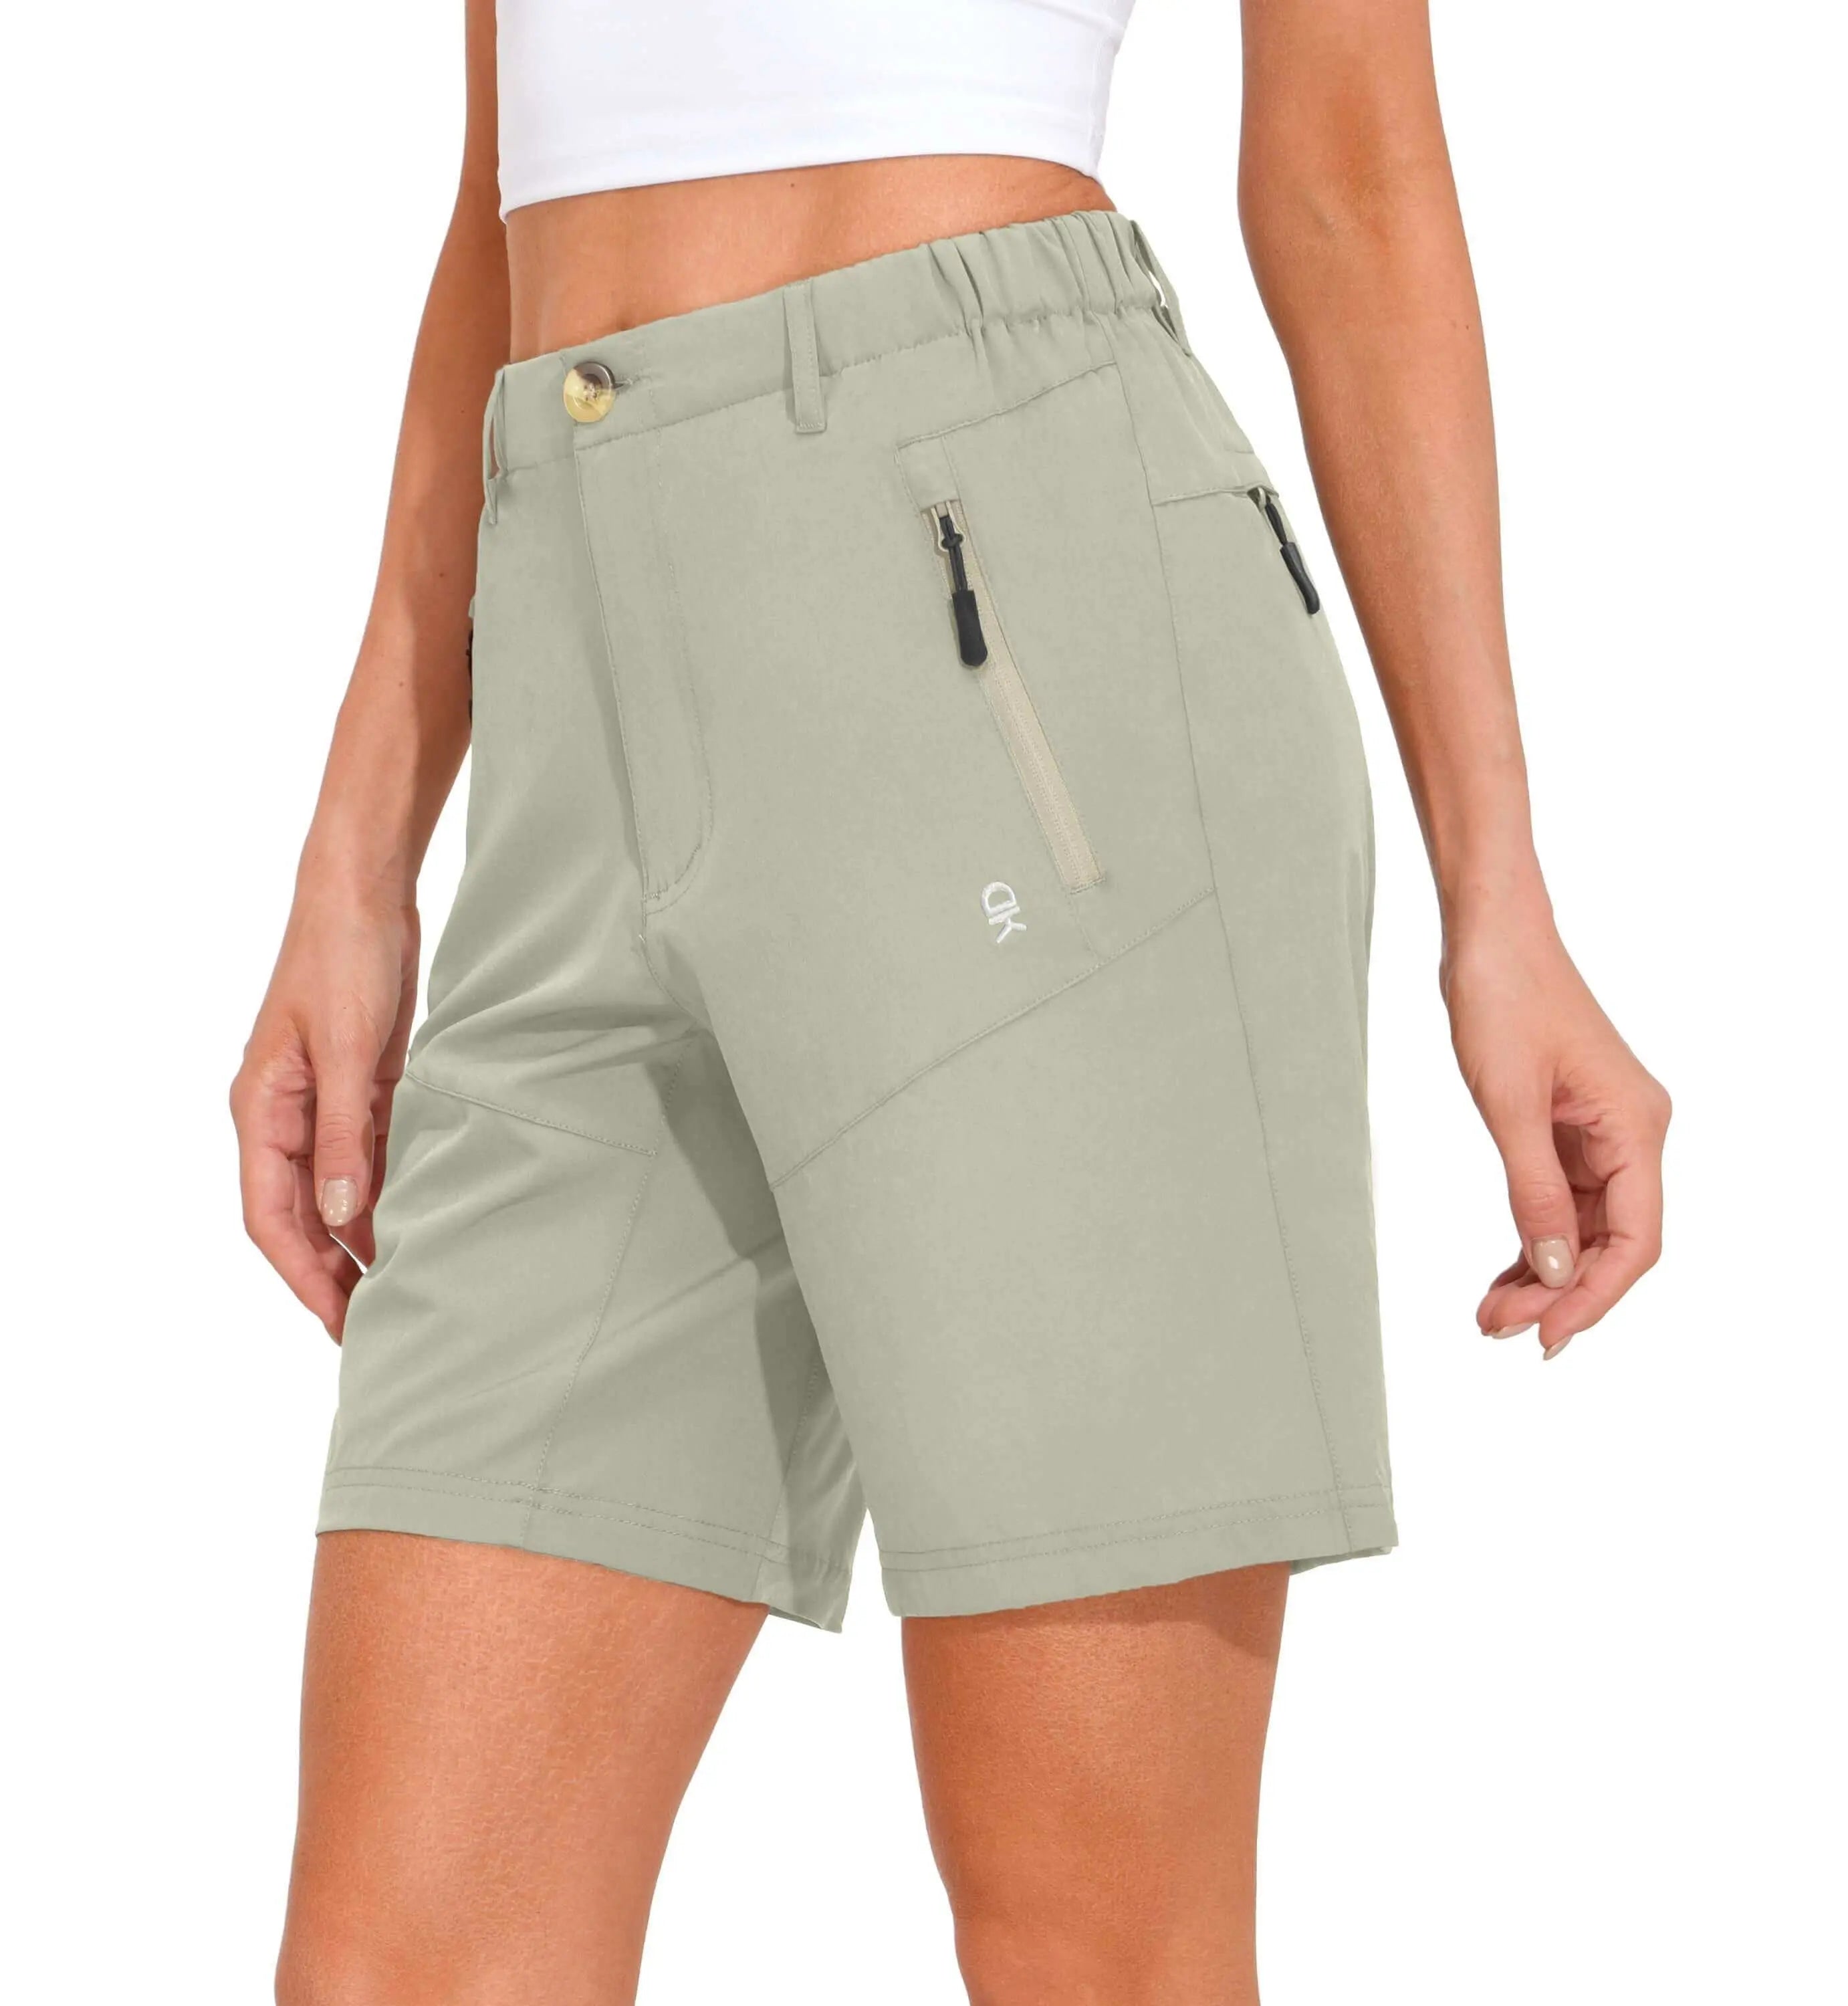 Women's Stretch Quick Dry UPF 50+ Shorts – Little Donkey Andy